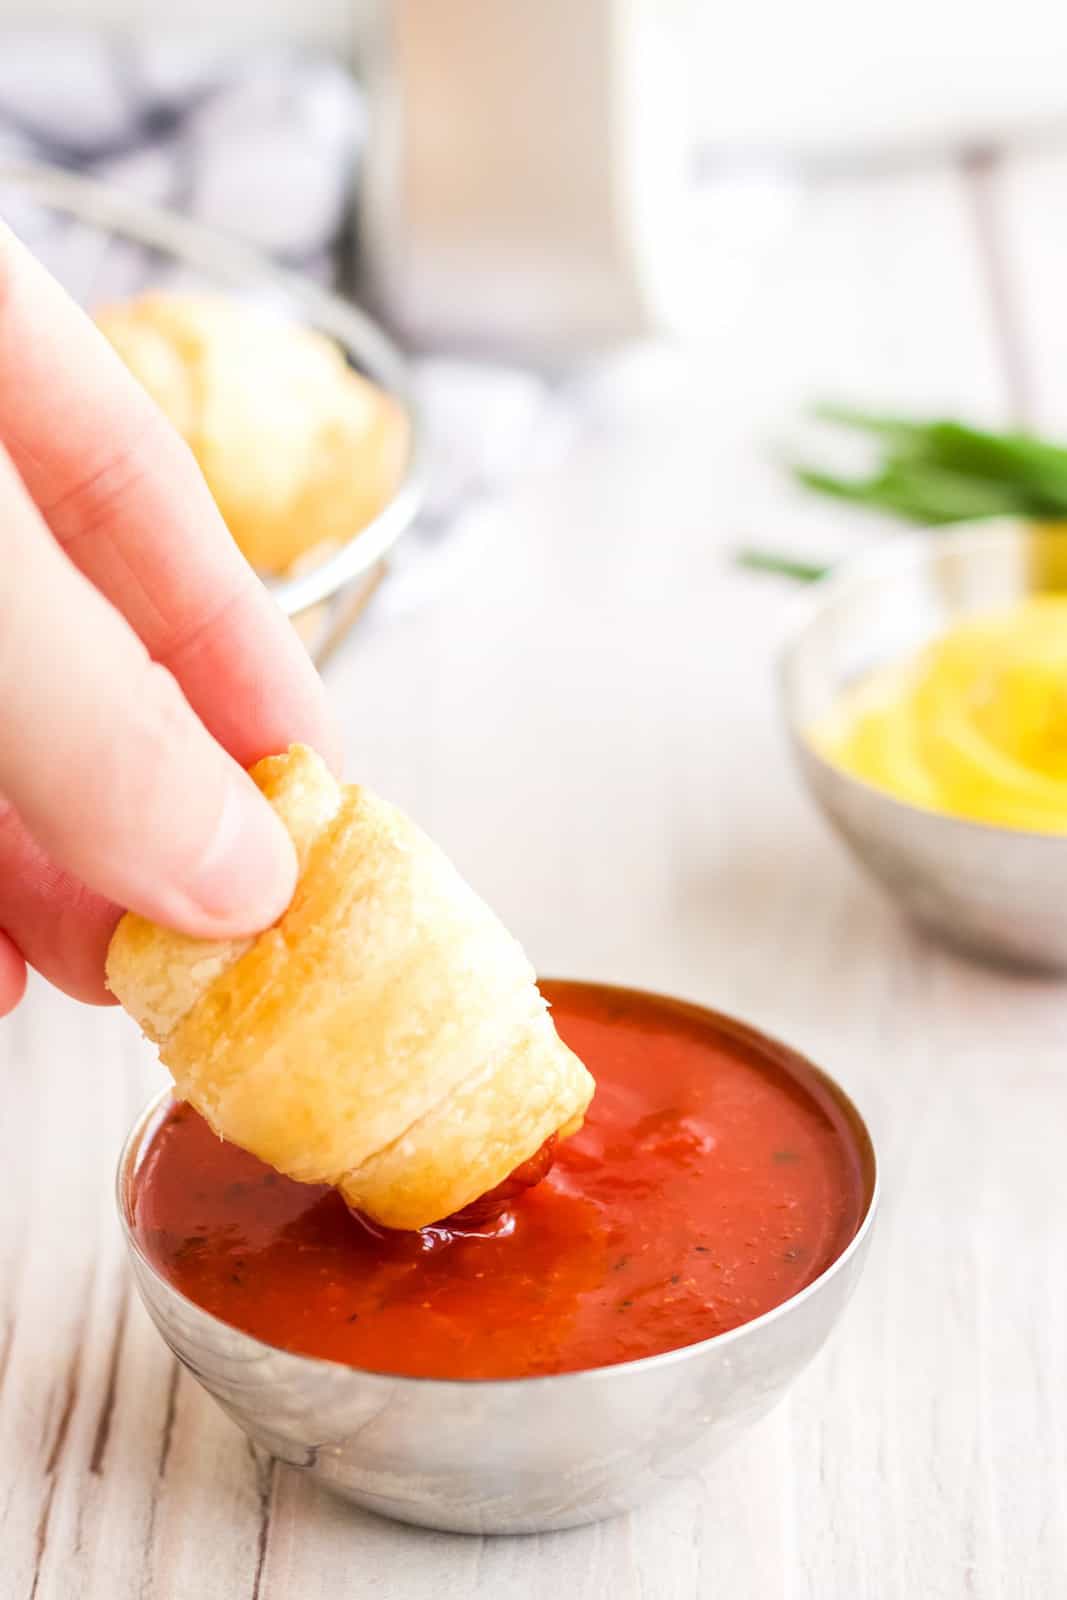 Hand dipping one Air Fryer Pigs in a Blanket in ketchup